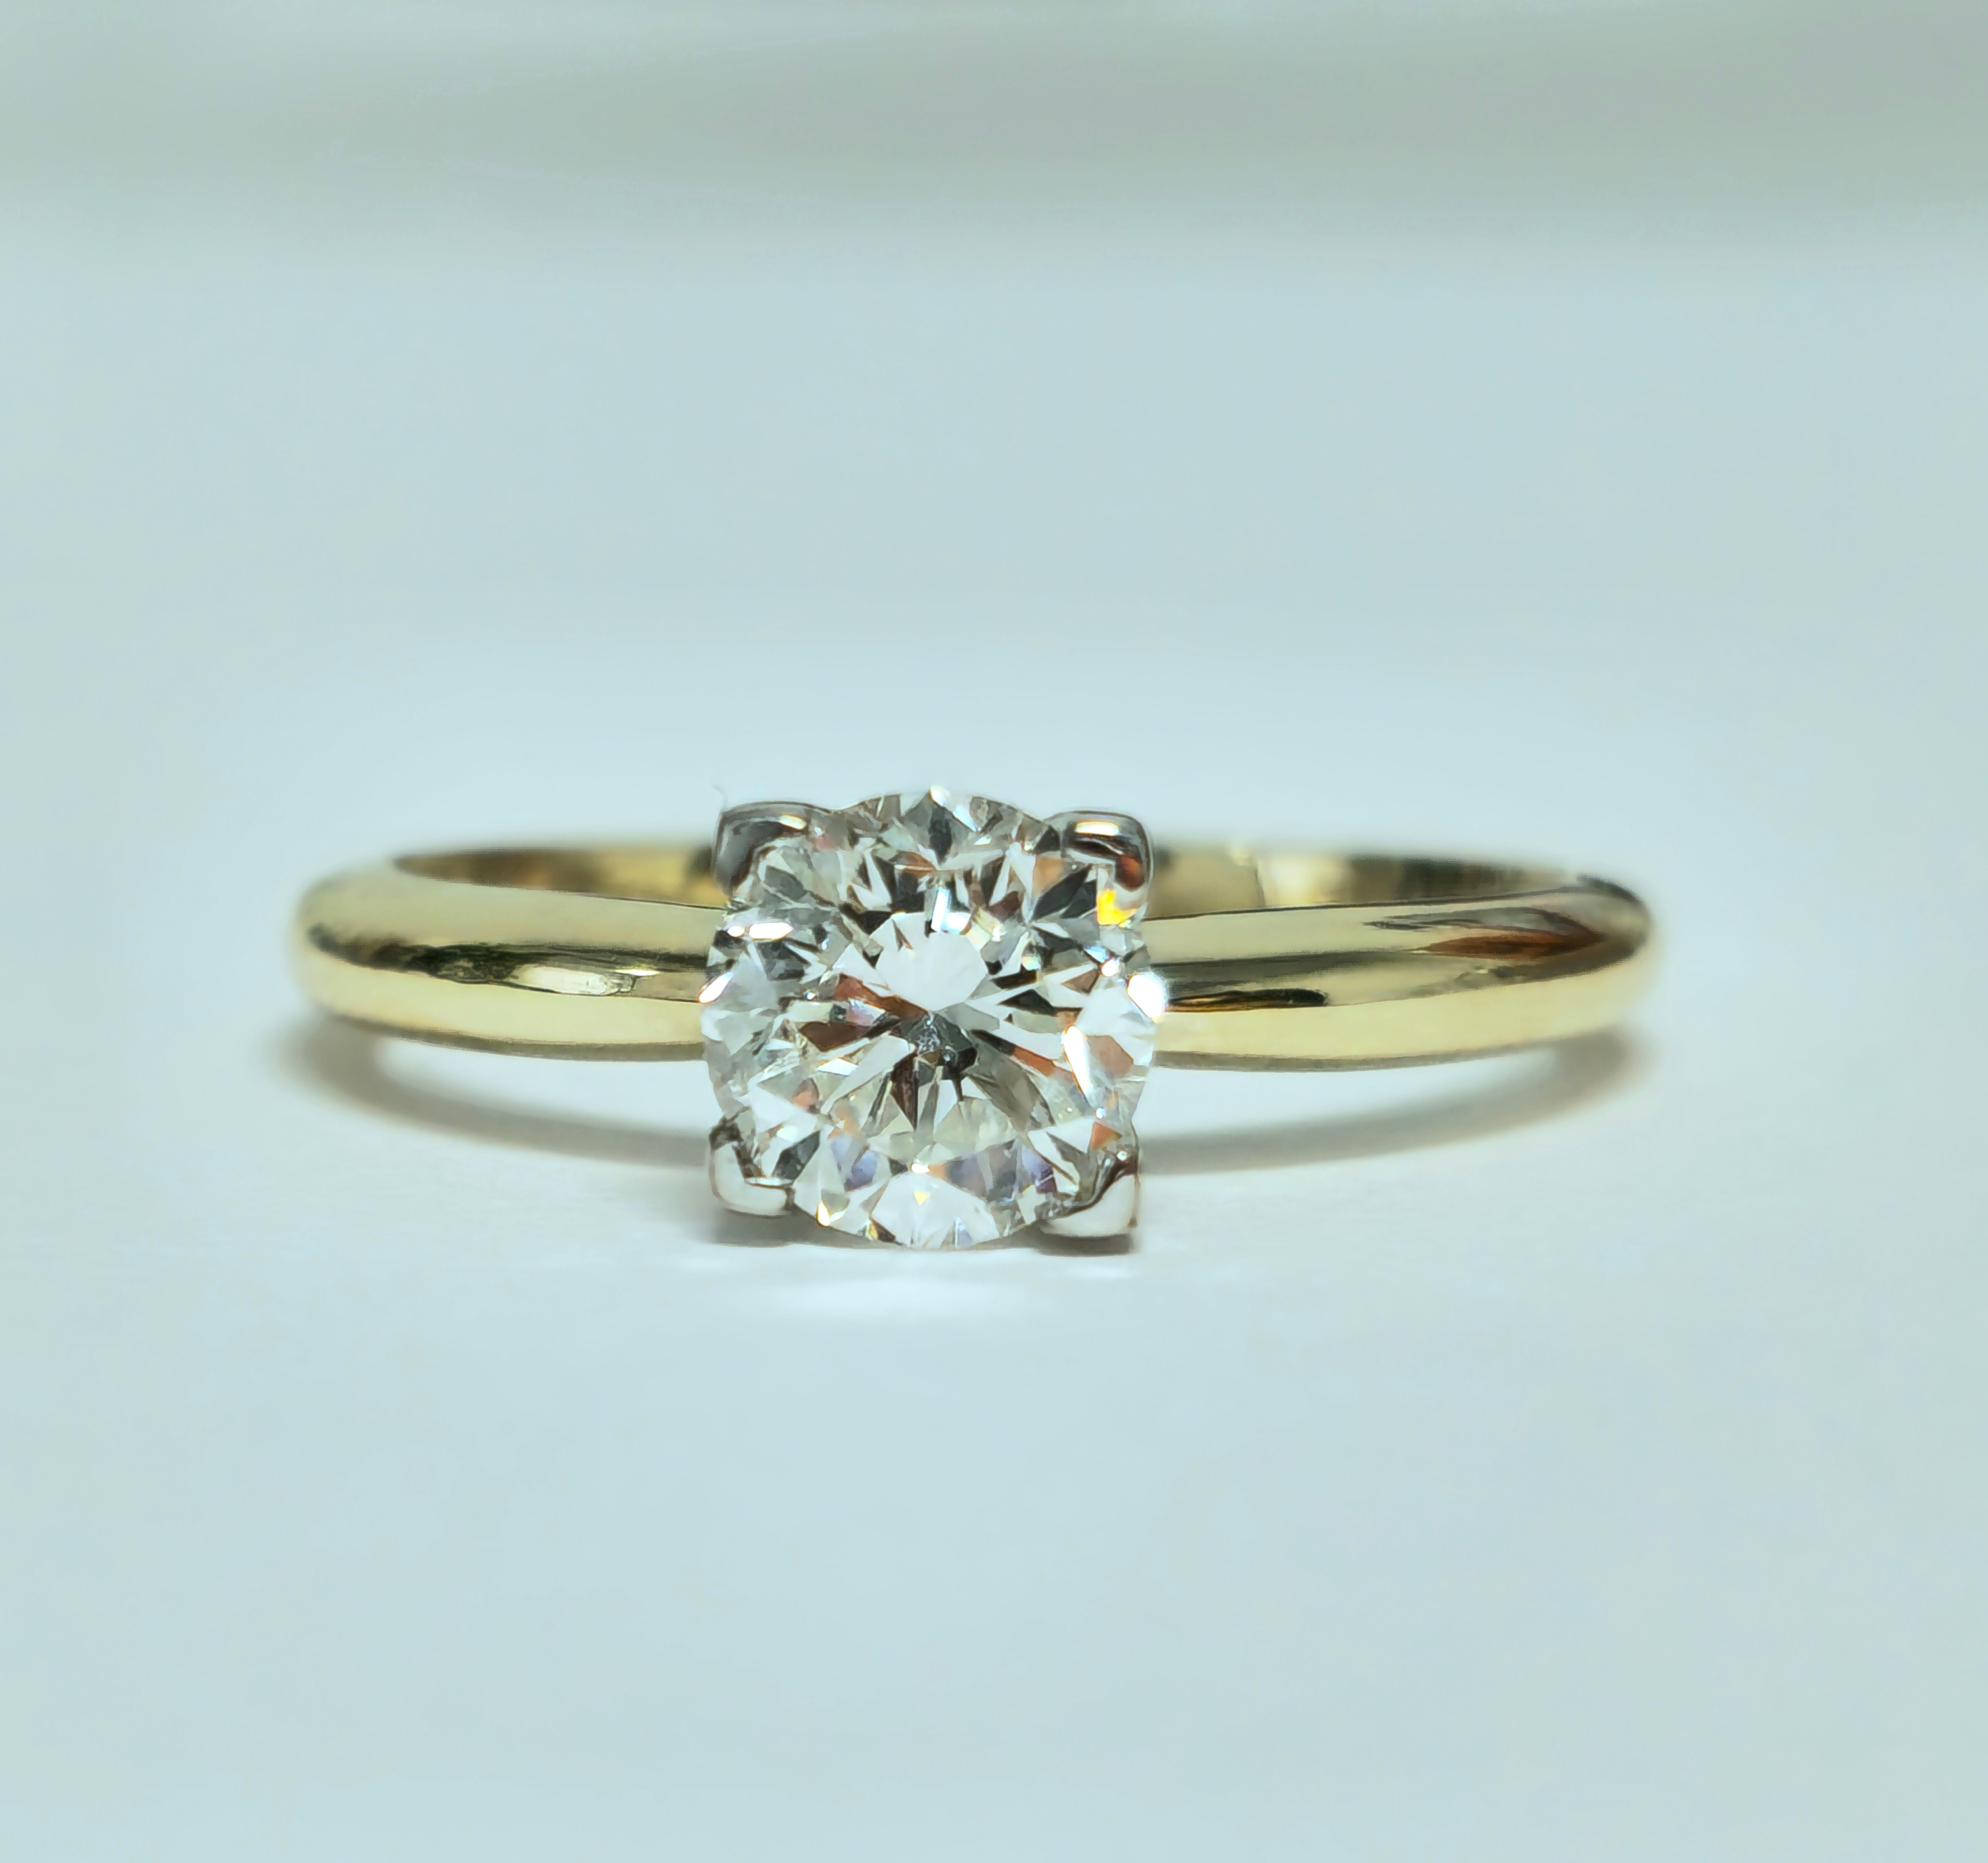 Crafted in 14k yellow gold, this stunning engagement ring features a brilliant 1.07 carat round-cut diamond, boasting VS1 clarity and G color. Mined from the earth, this diamond shines beautifully against the gold band. With a ring size of US 7, it